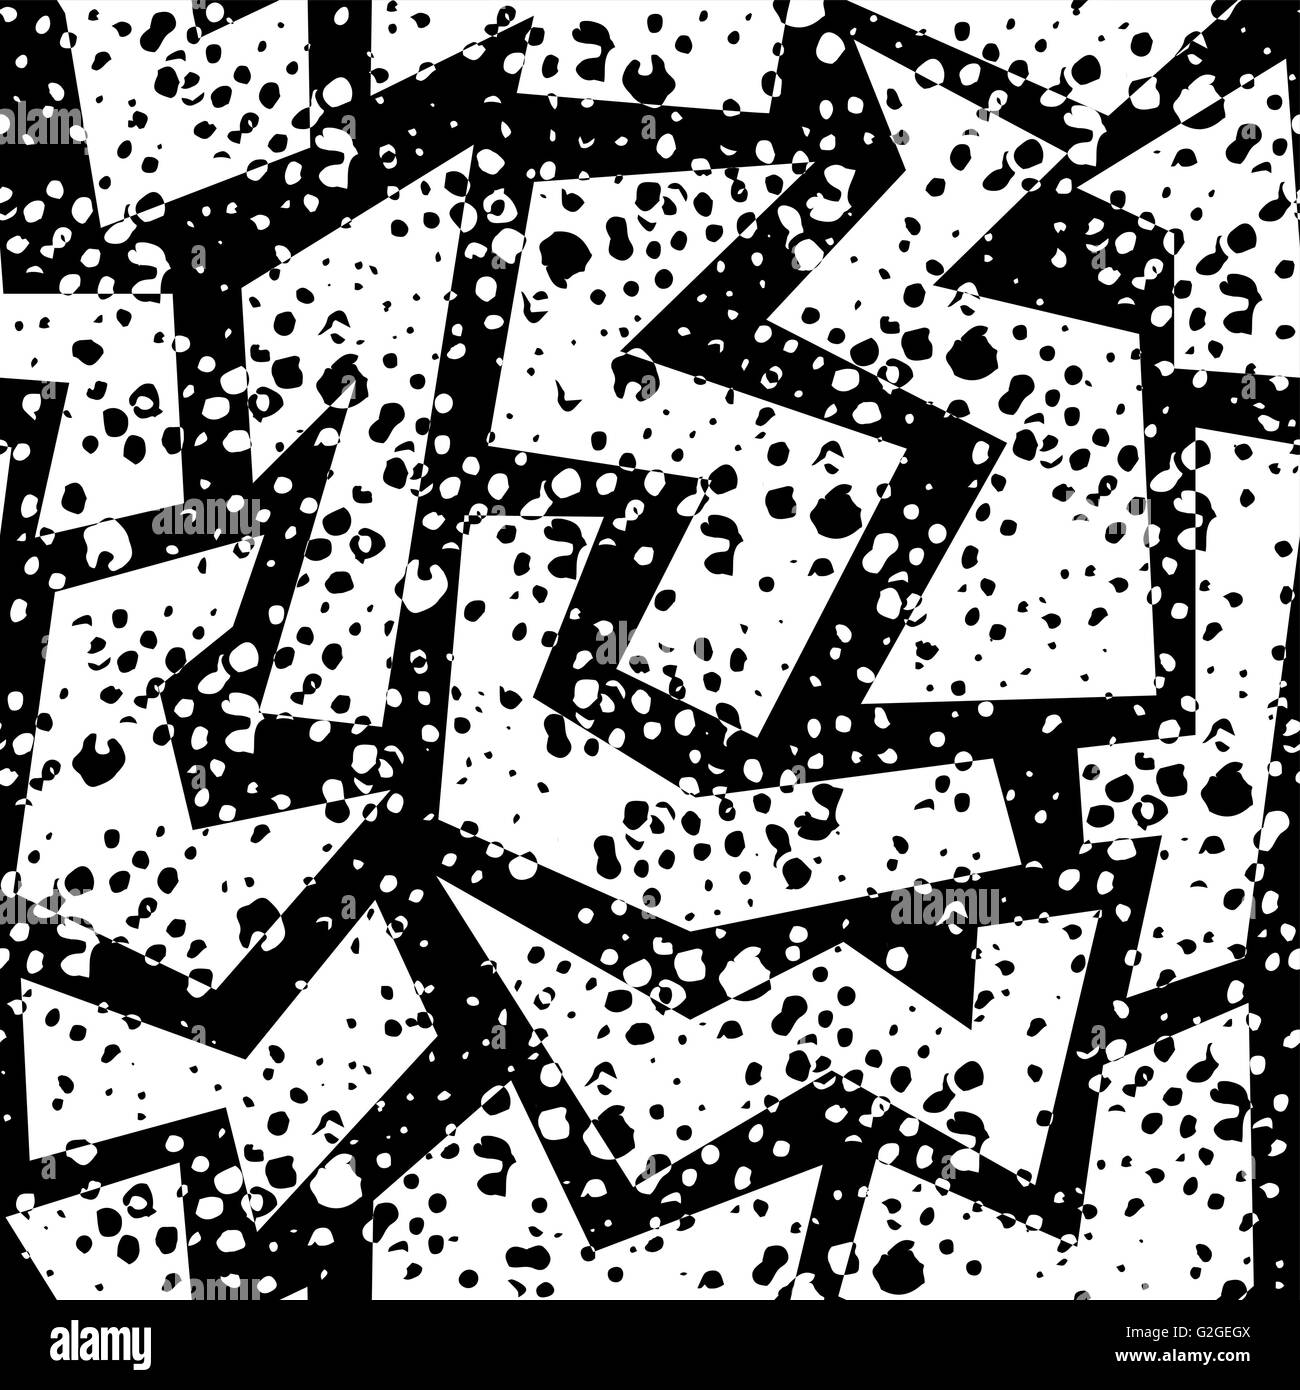 Black and white retro 80s seamless pattern with geometric shapes, grunge texture in memphis fashion style. Ideal for web backgro Stock Vector